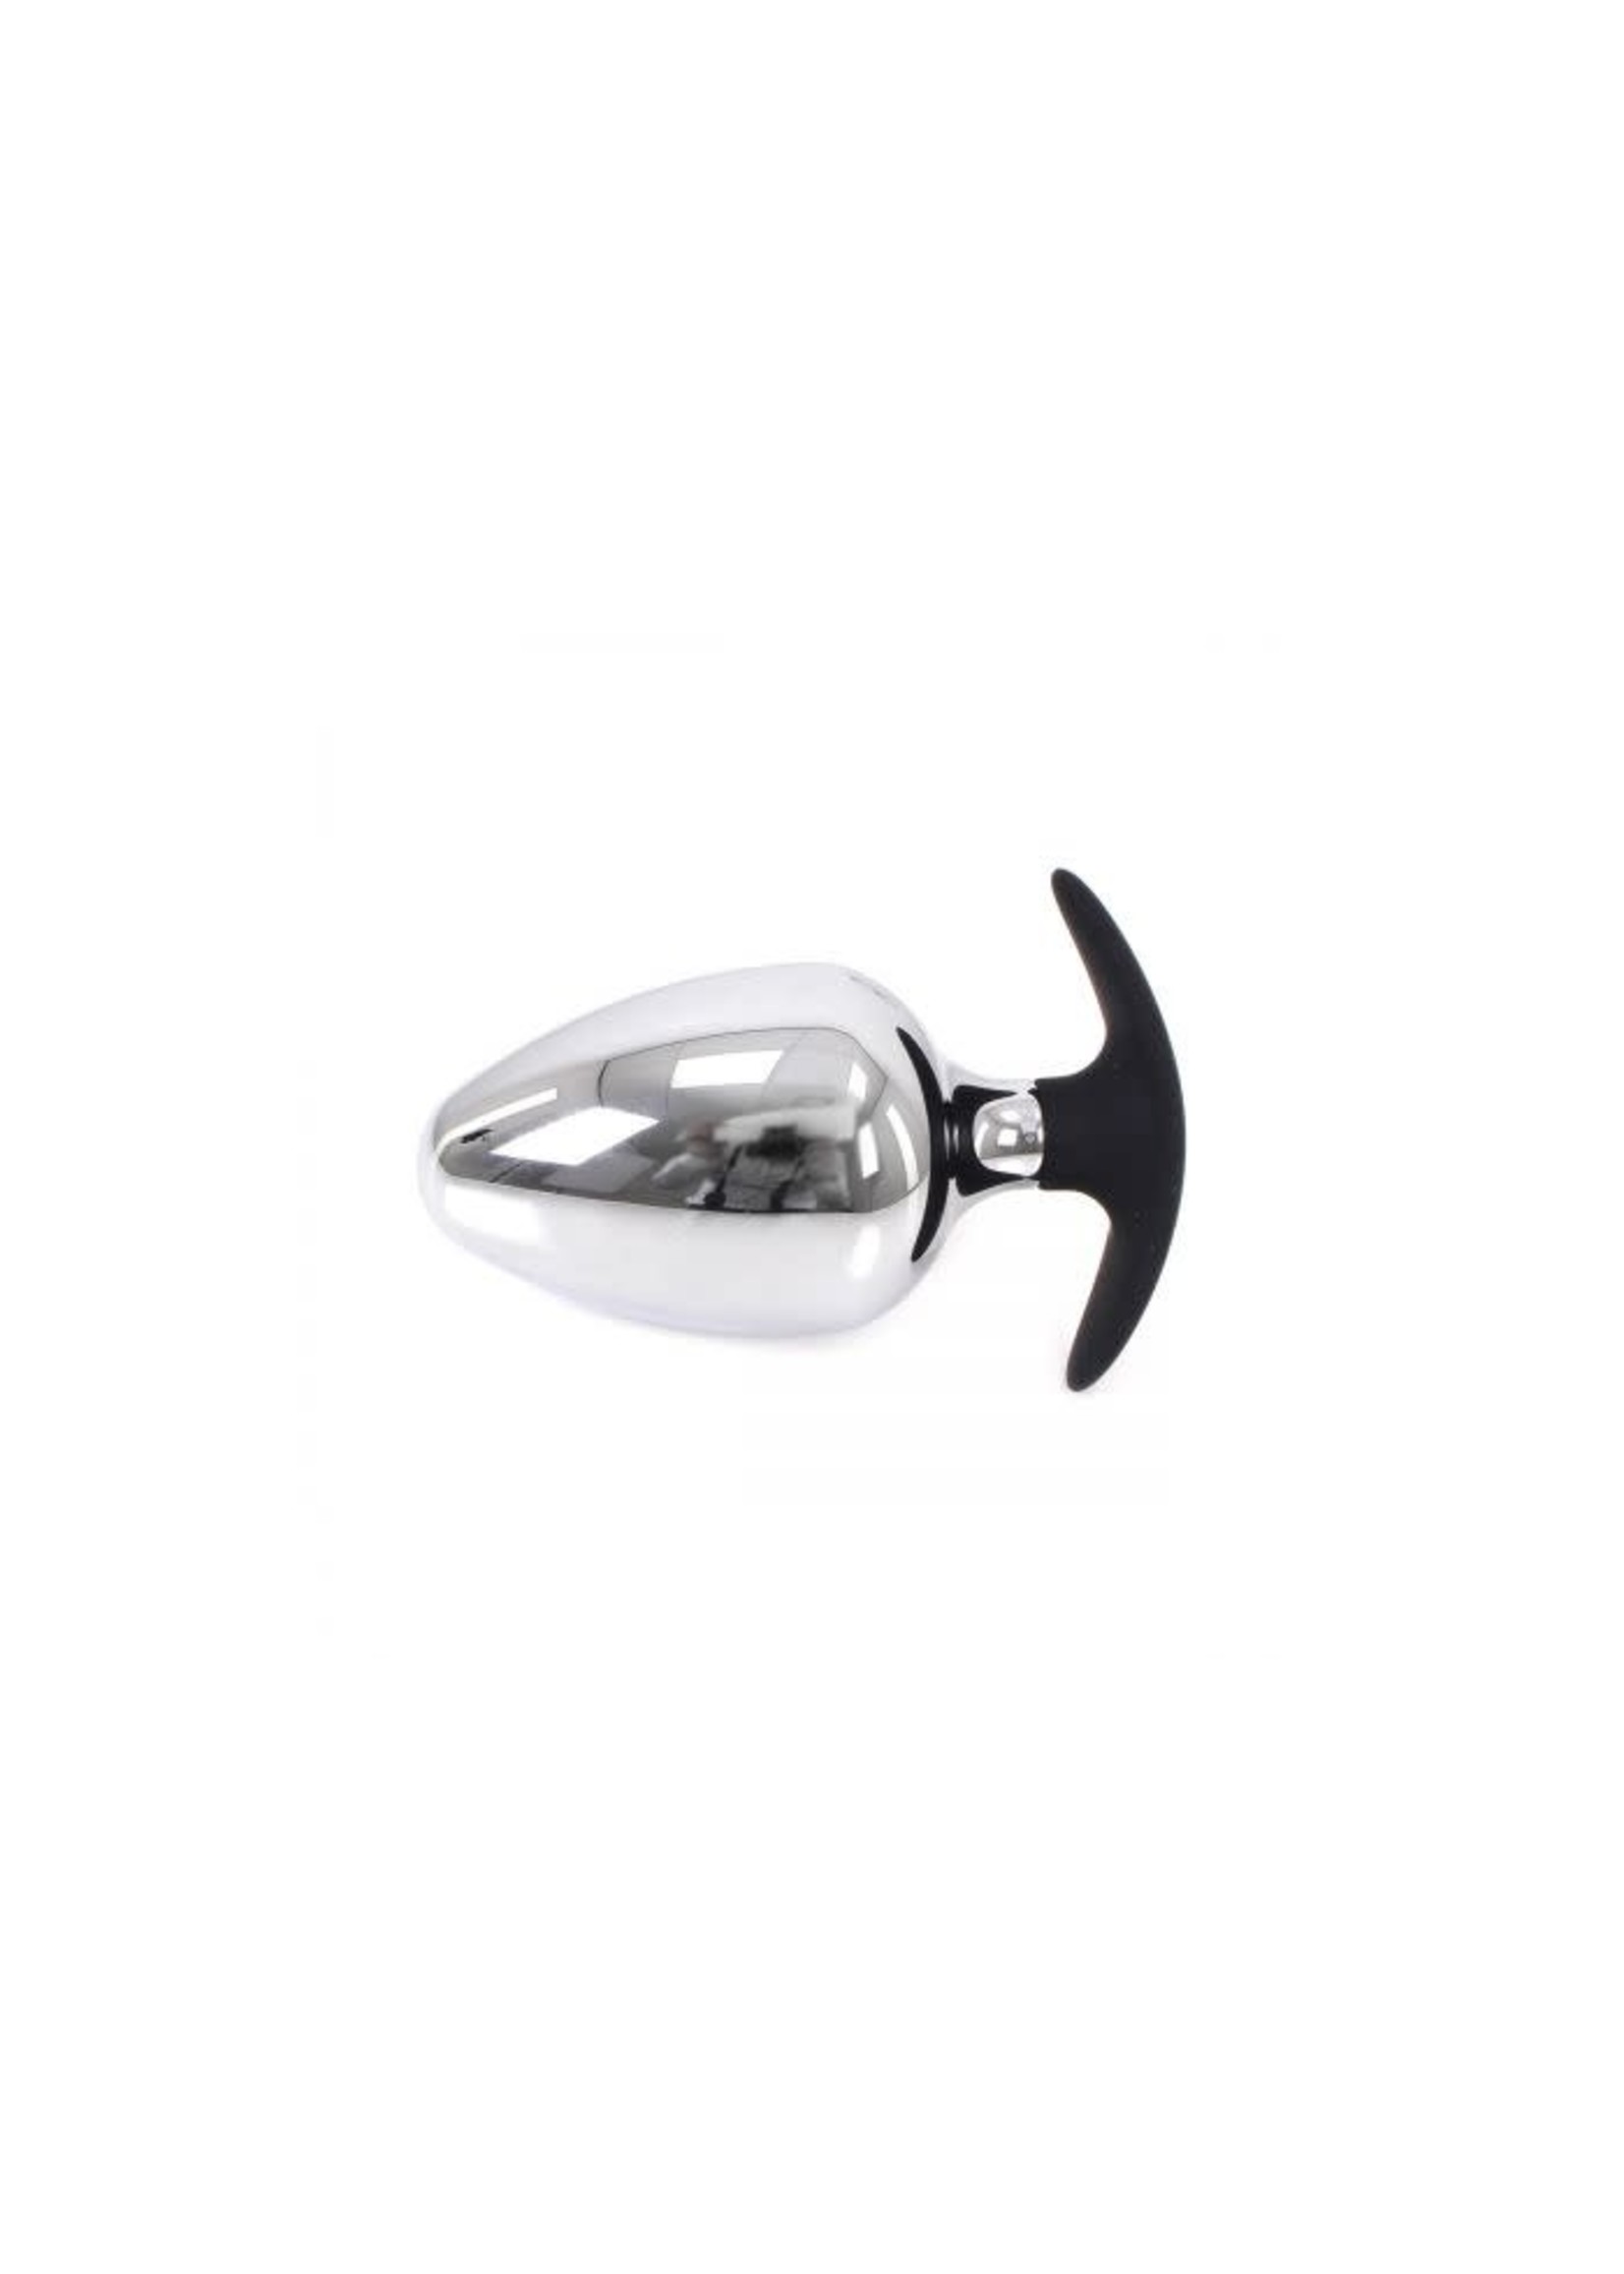 O-Products Buttplug BIG-S 70 mm